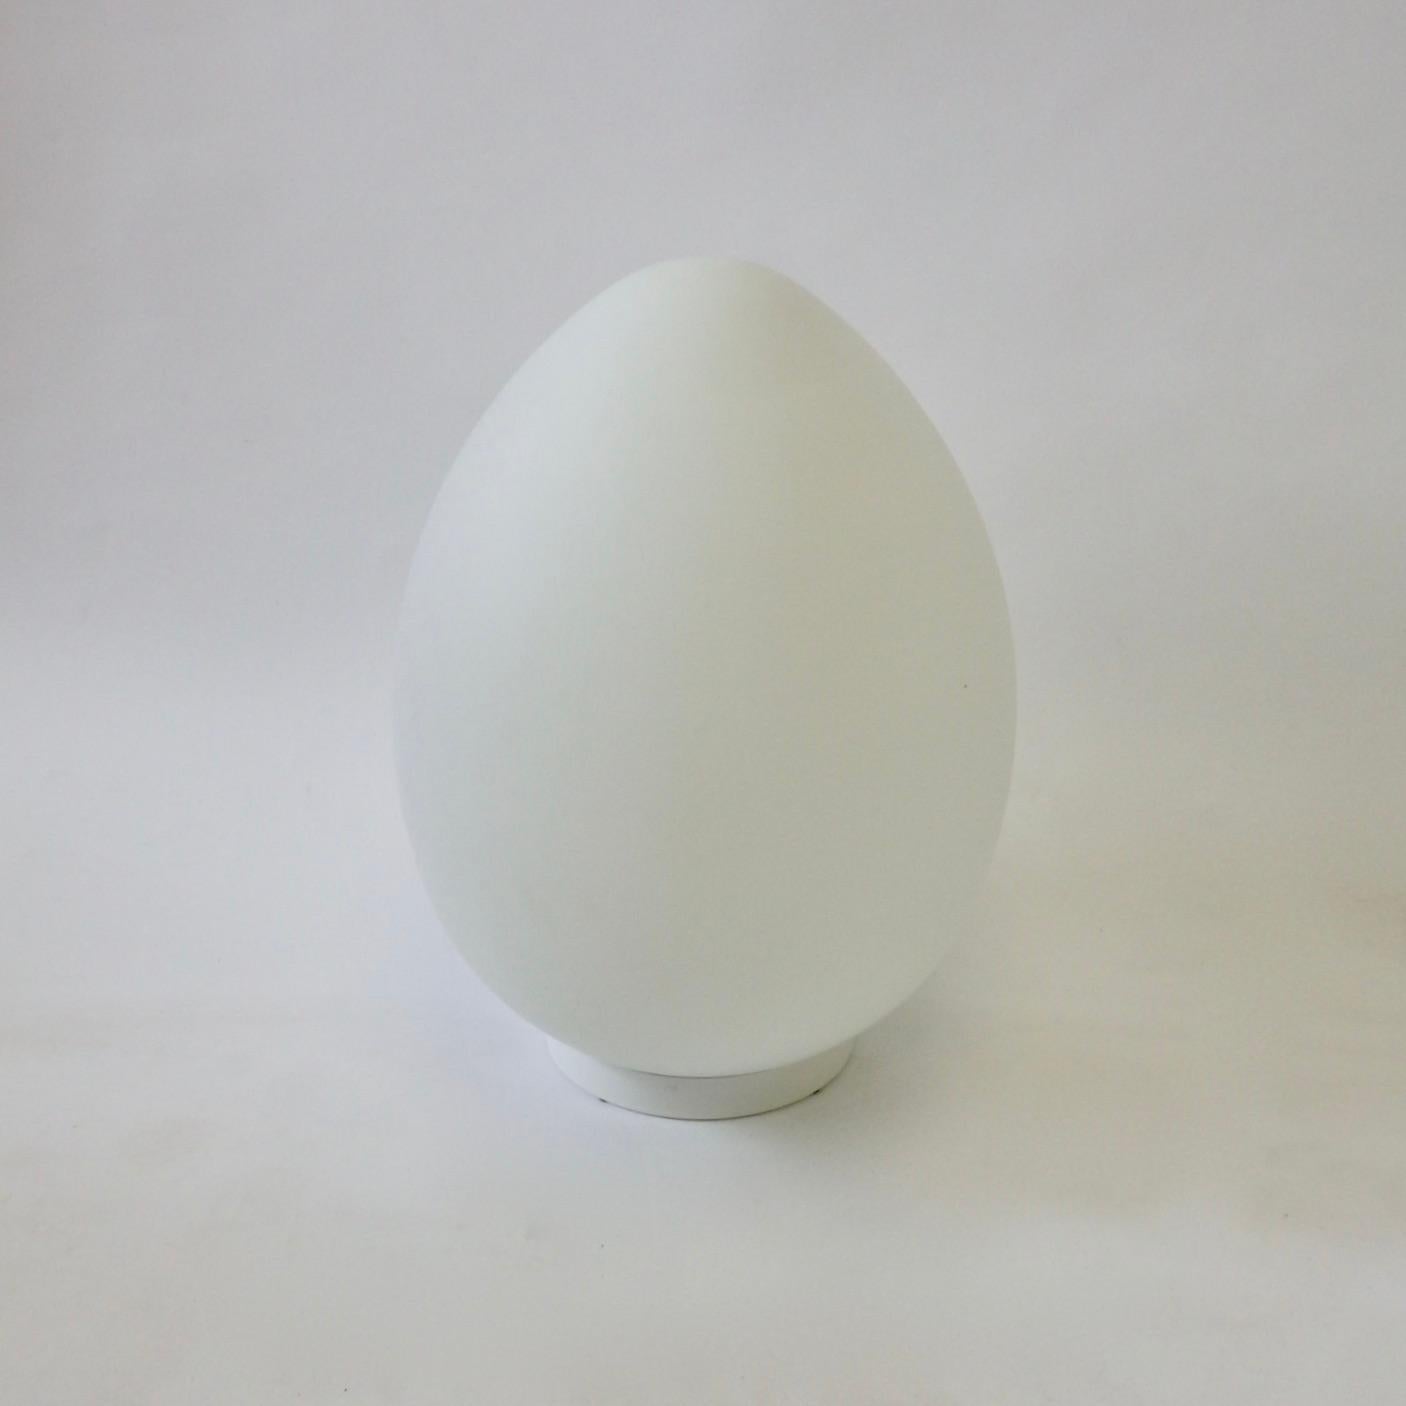 tabletop frosted egg shape lamp. Warm glow accent light.